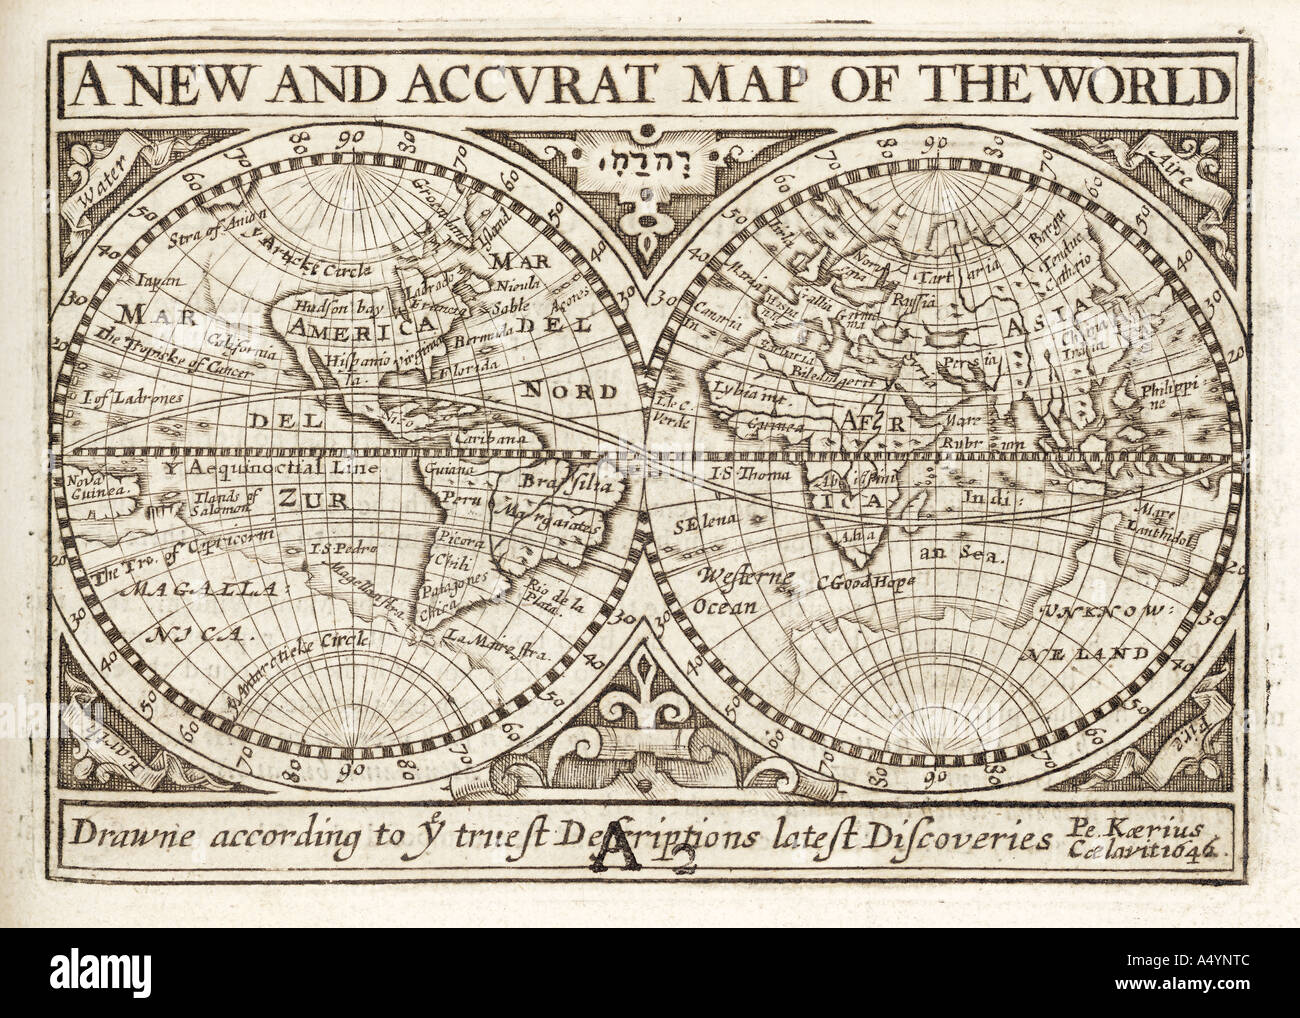 Antique map of the World by Petrus Kaerius 1646 from John Speed Prospect of the most Famous Parts of the World 1675 JMH0981 Stock Photo